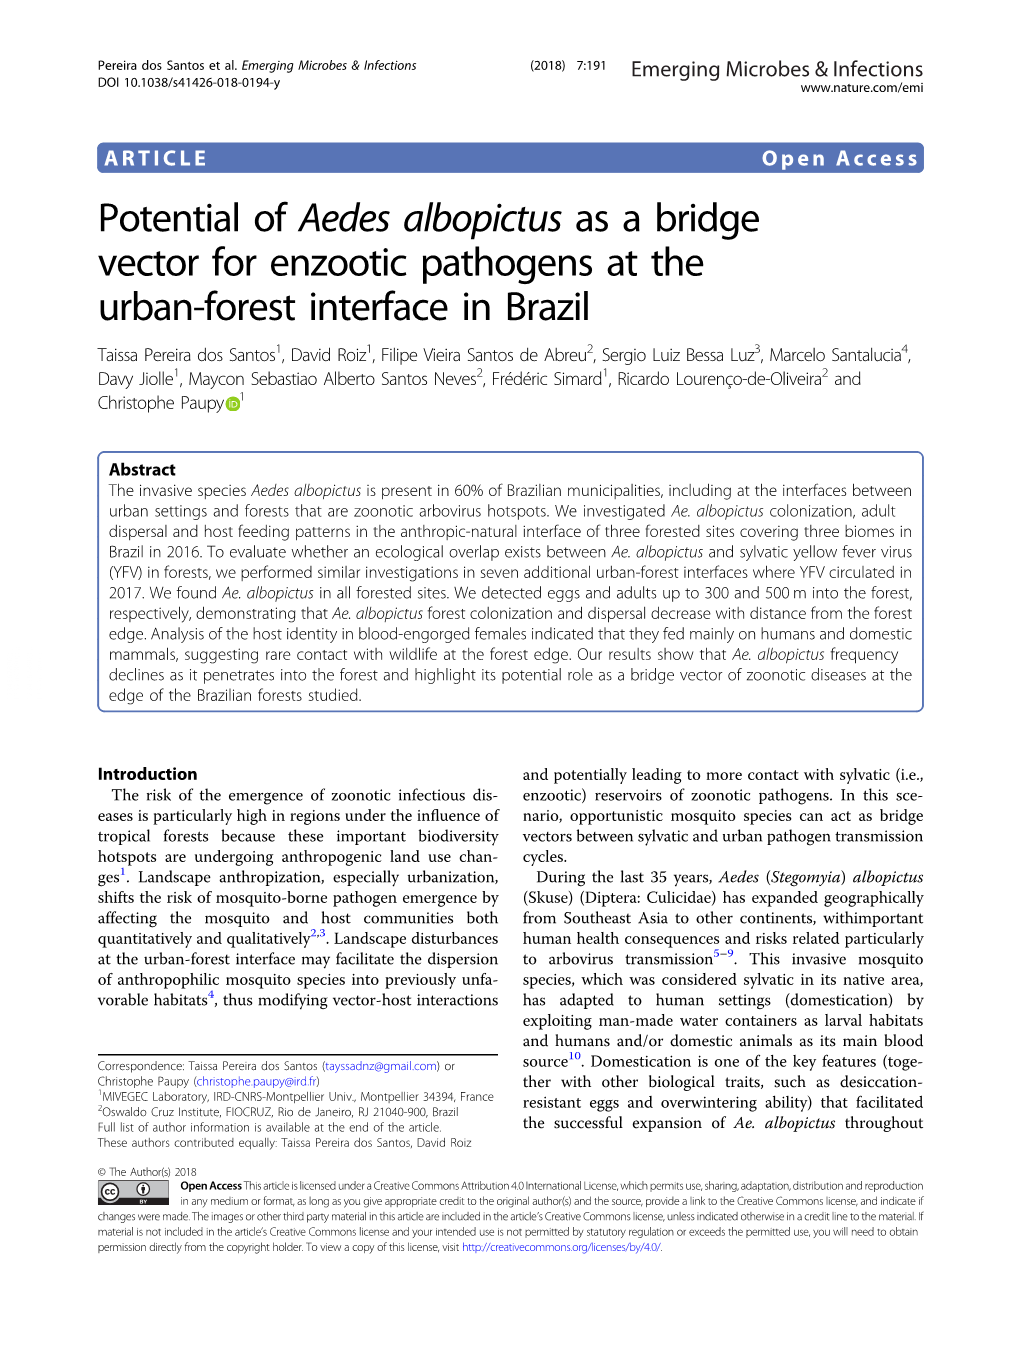 Potential of Aedes Albopictus As a Bridge Vector for Enzootic